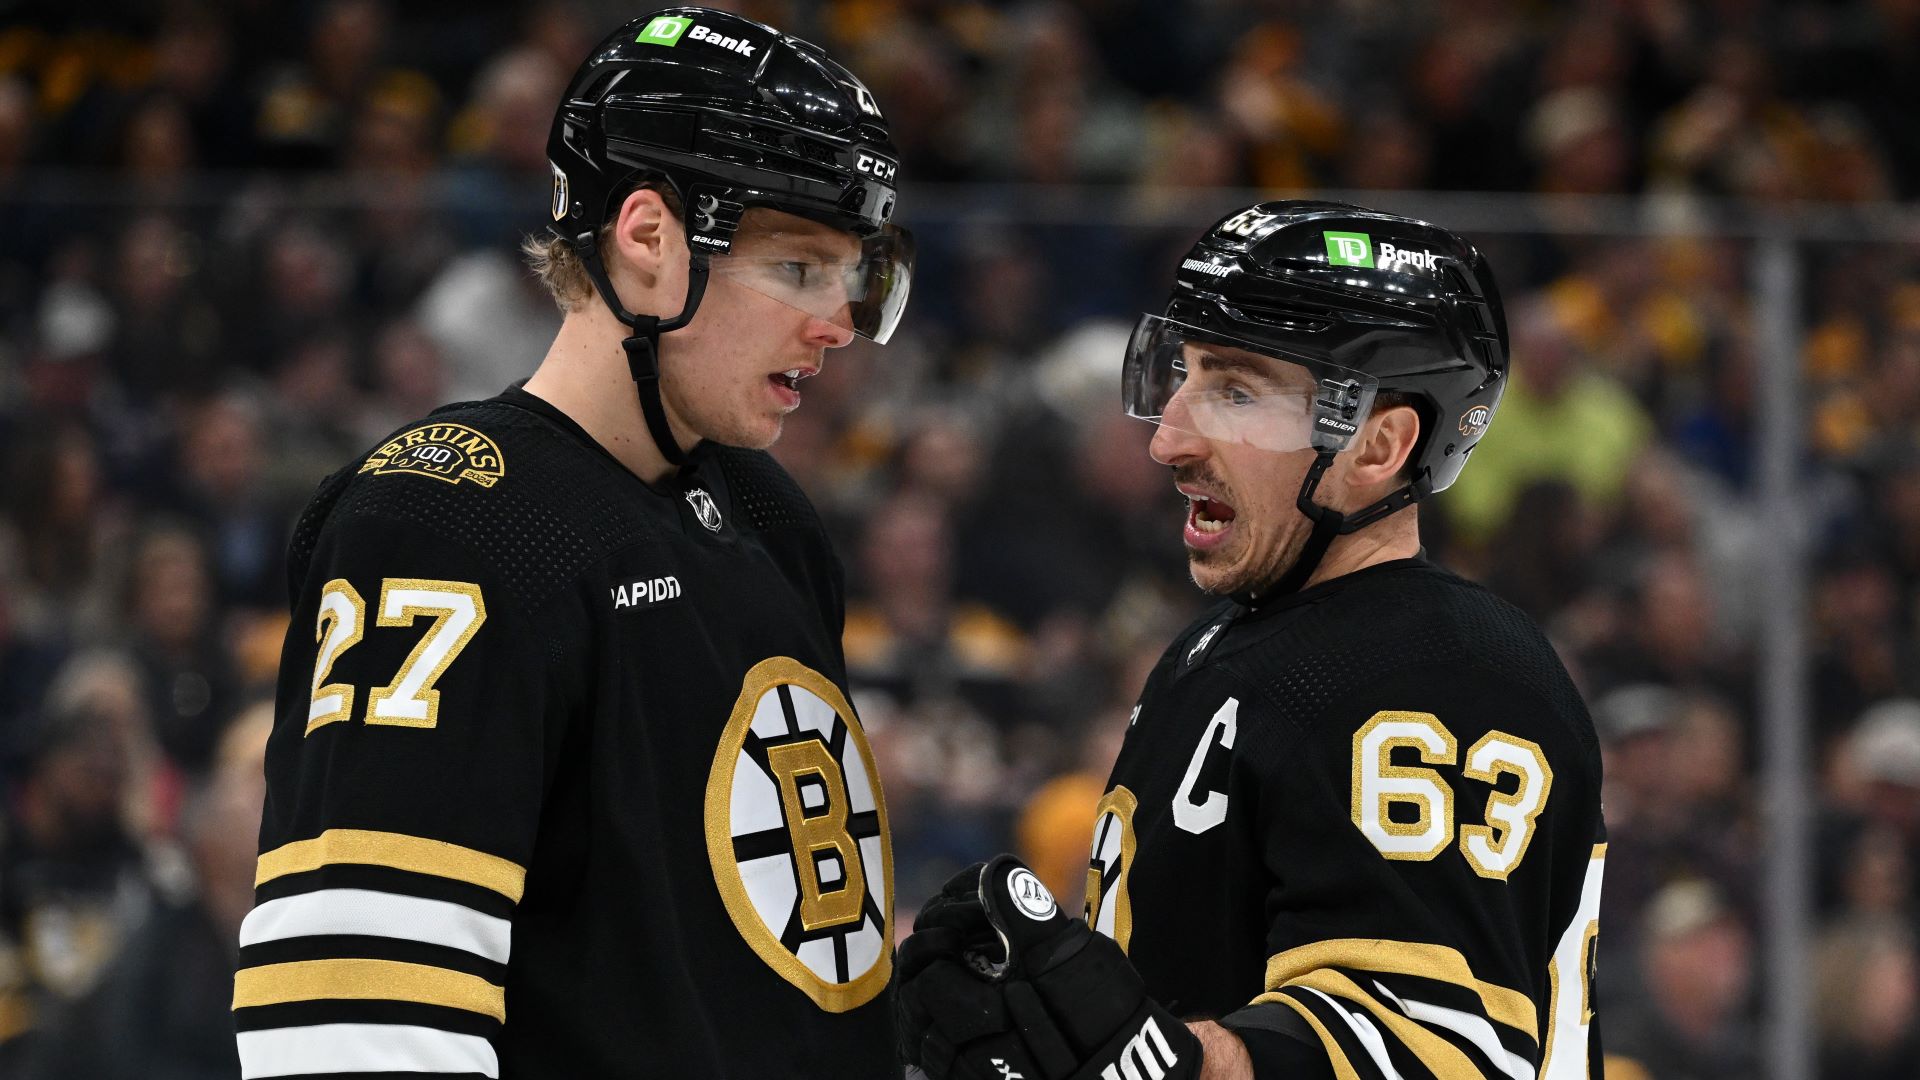 This Giving Bruins Extra Motivation For Game 5 Against Panthers